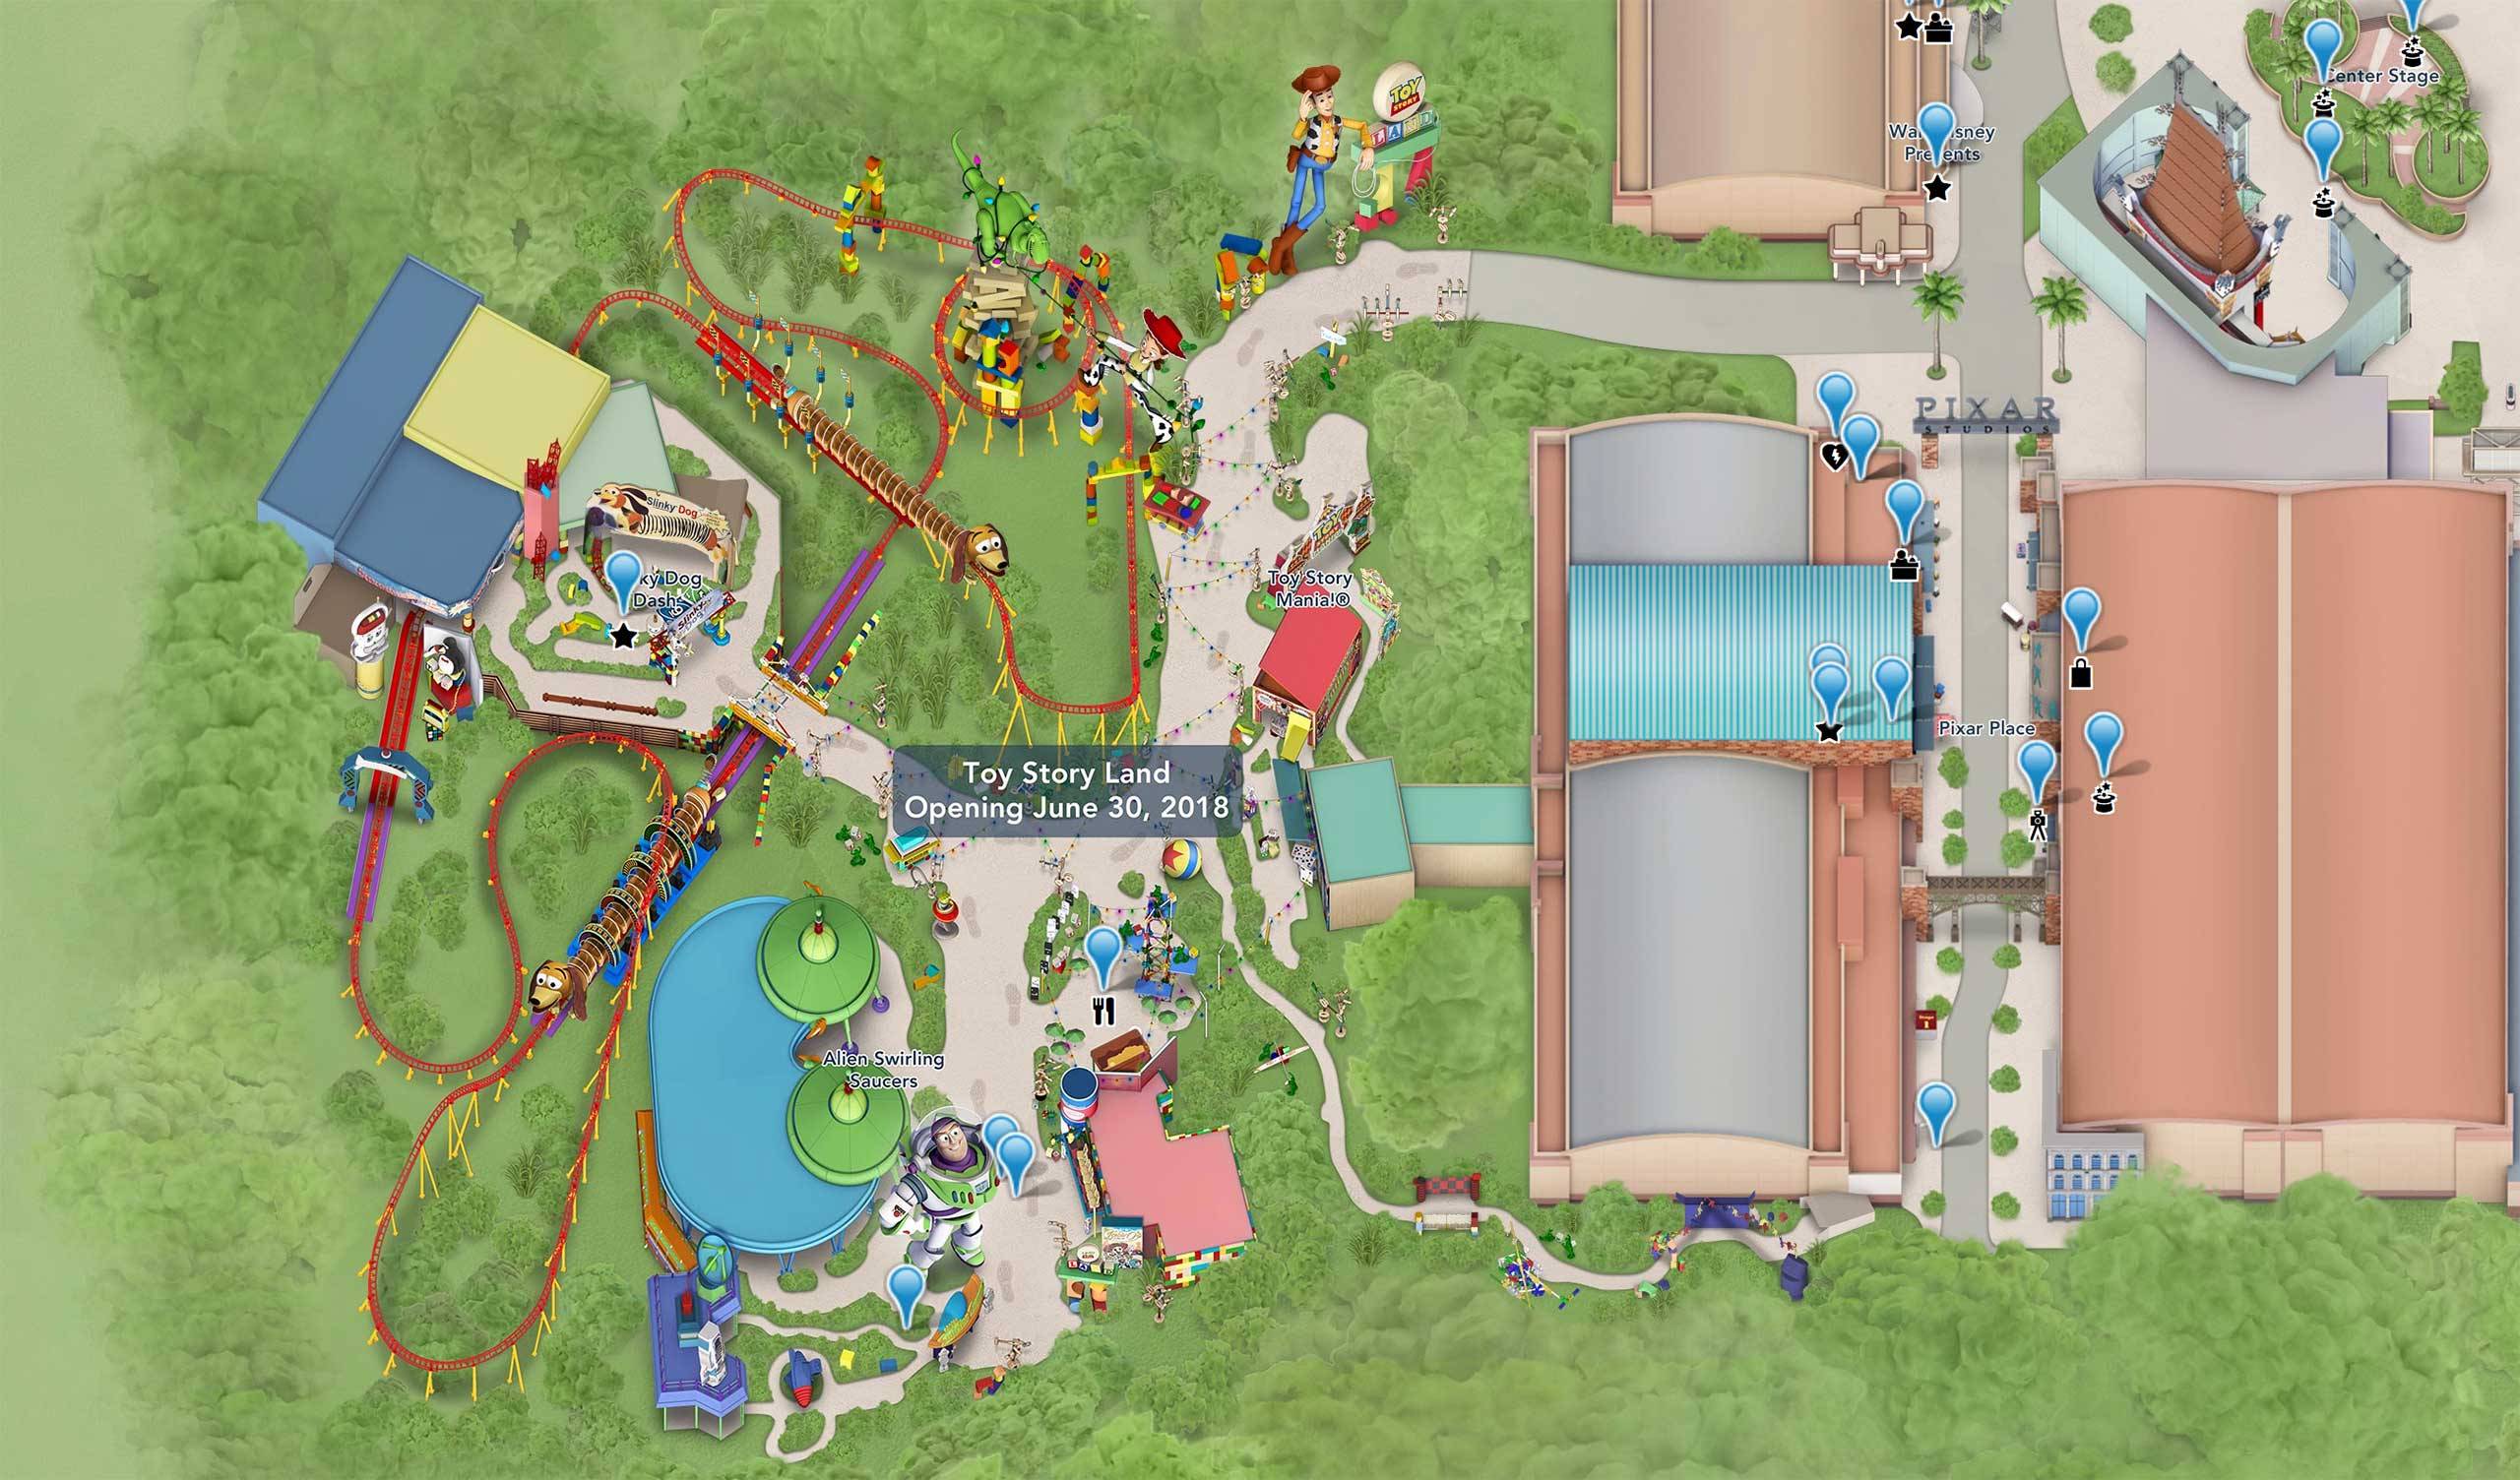 PHOTO - The completed Toy Story Land now included on My Disney Experience maps